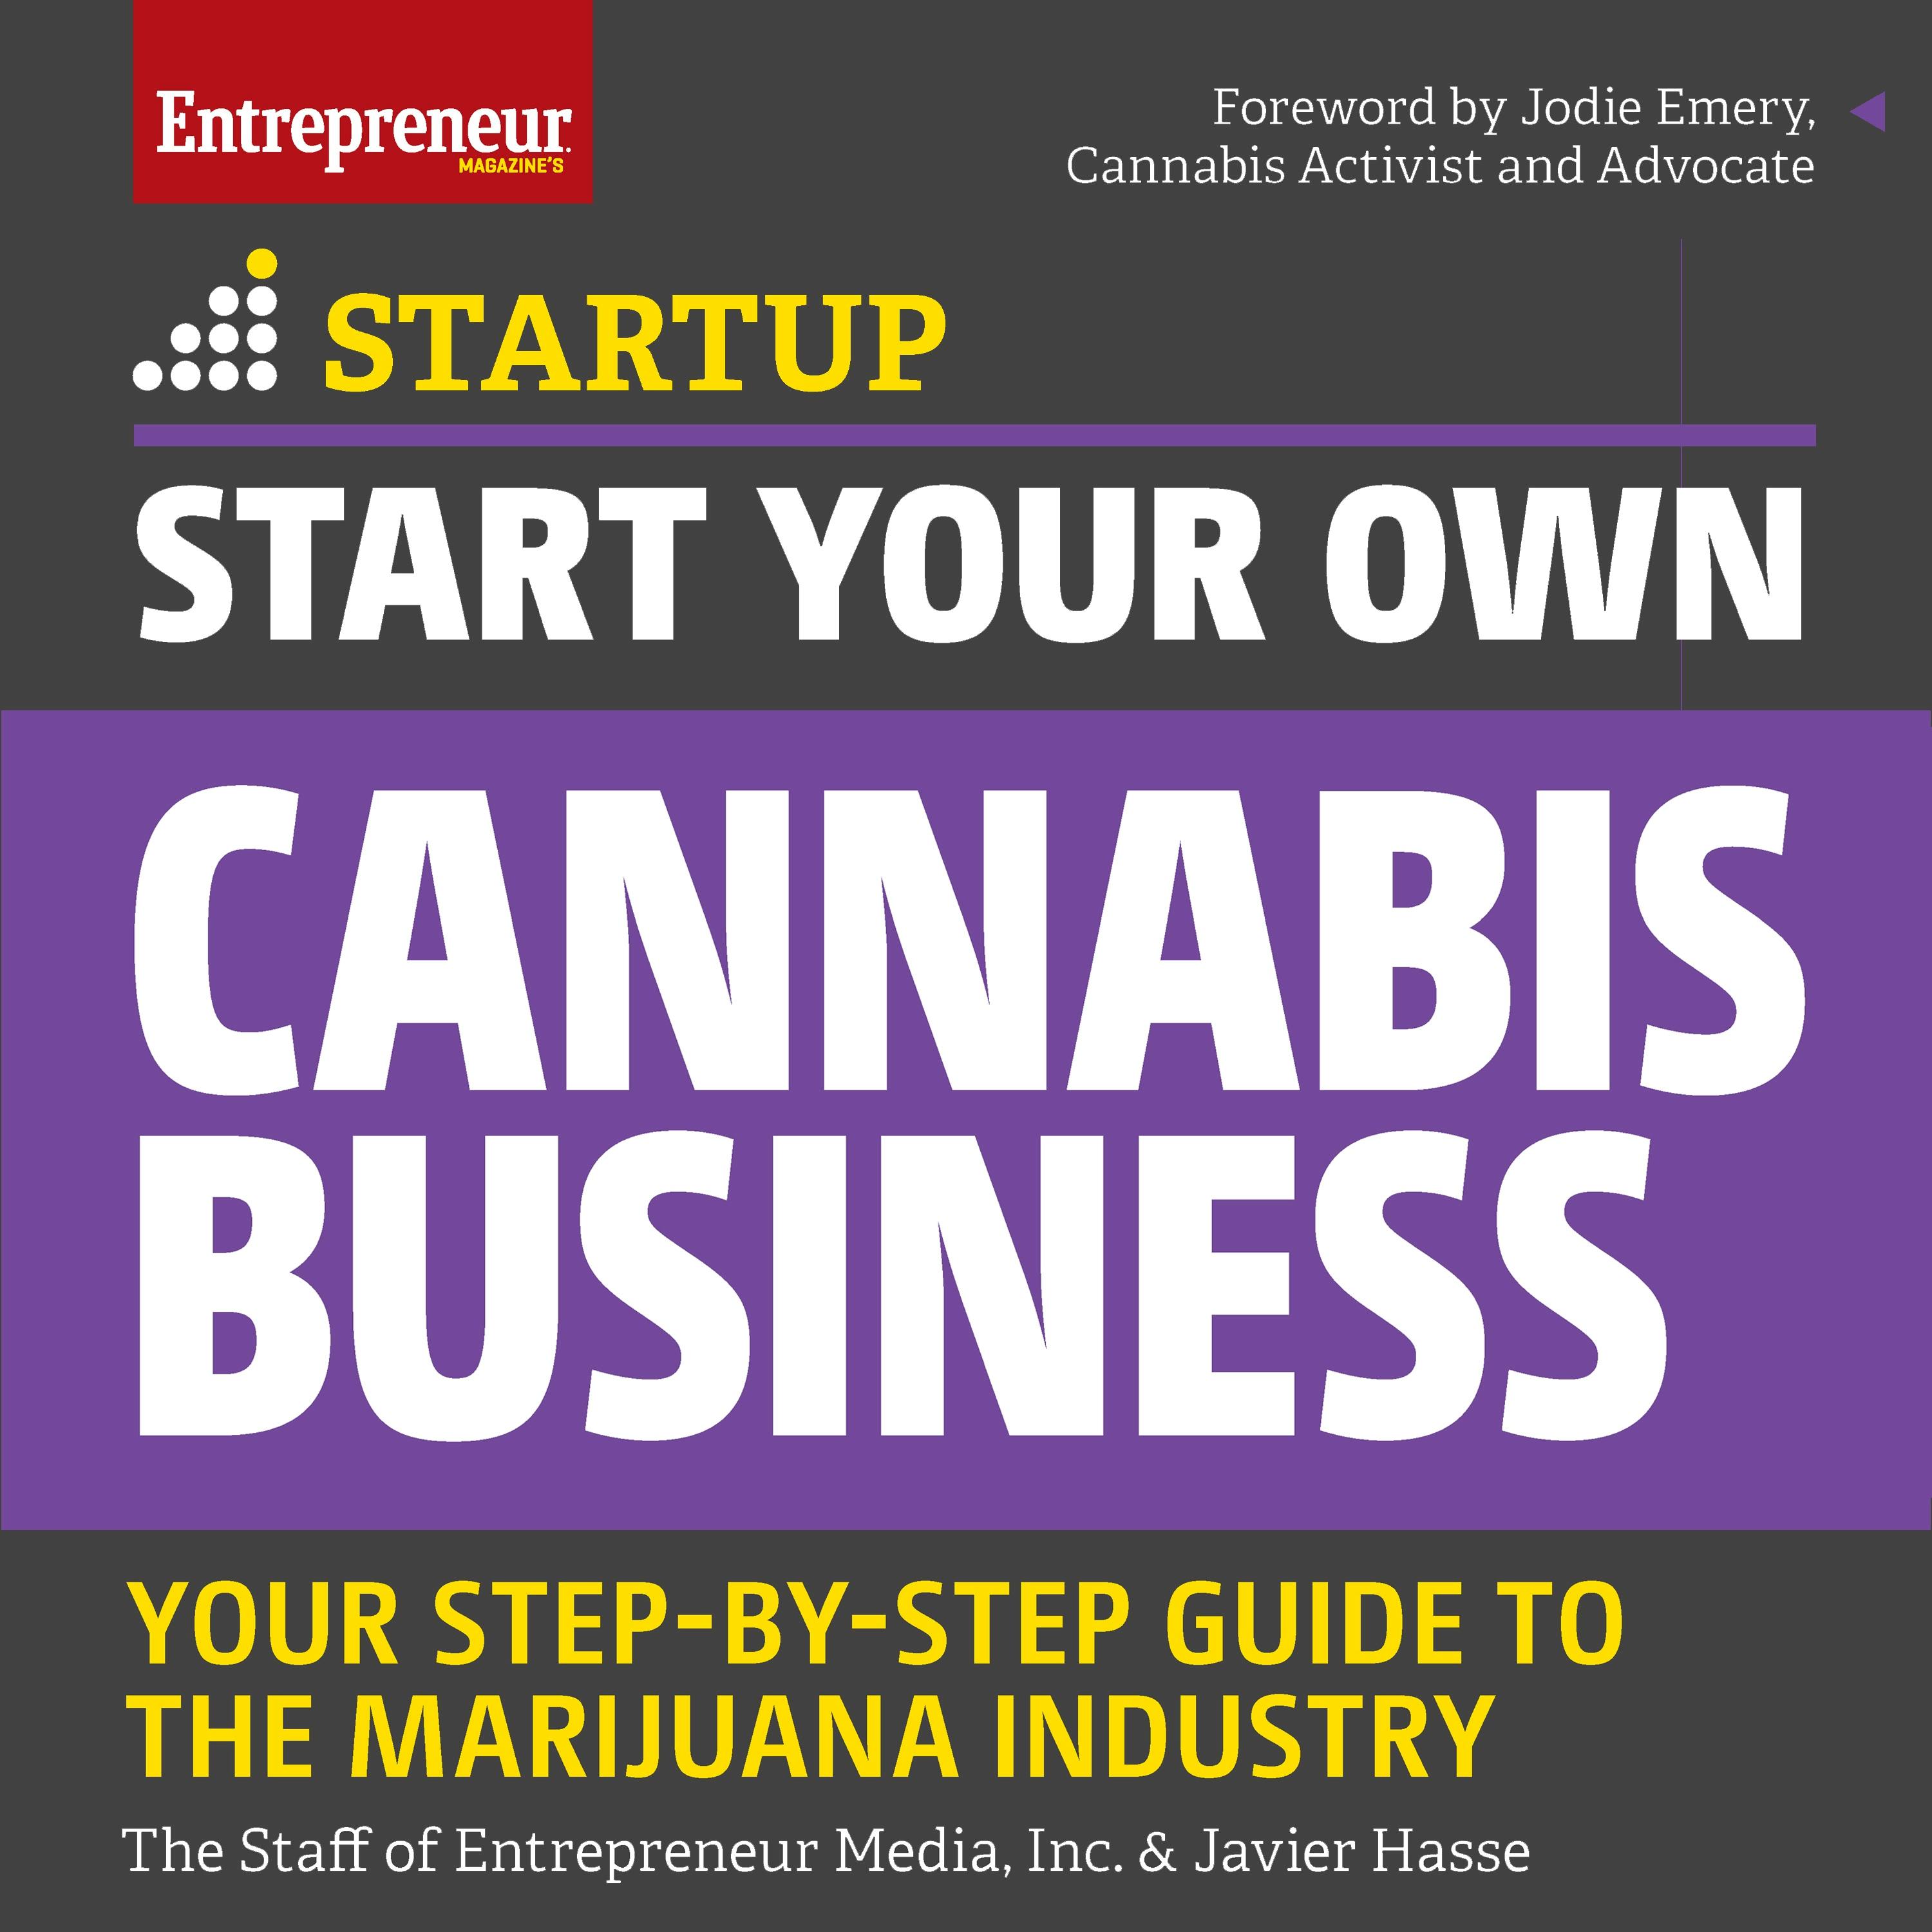 Start Your Own Cannabis Business: Your Step-By-Step Guide to the Marijuana Industry - The Staff of Entrepreneur Media Inc., Javier Hasse